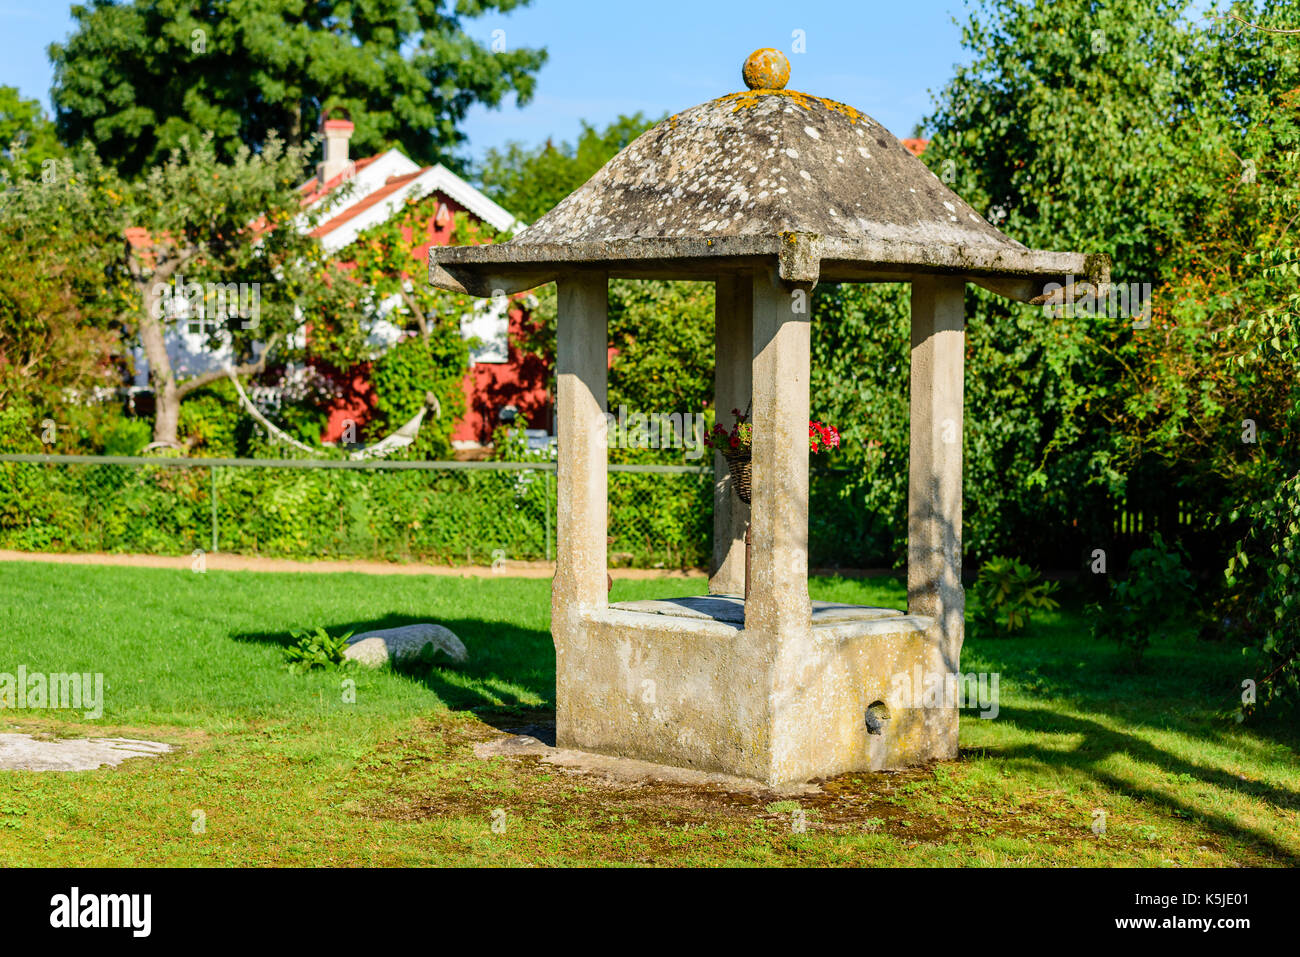 Public concrete water well with flower basket hanging inside it. Stock Photo